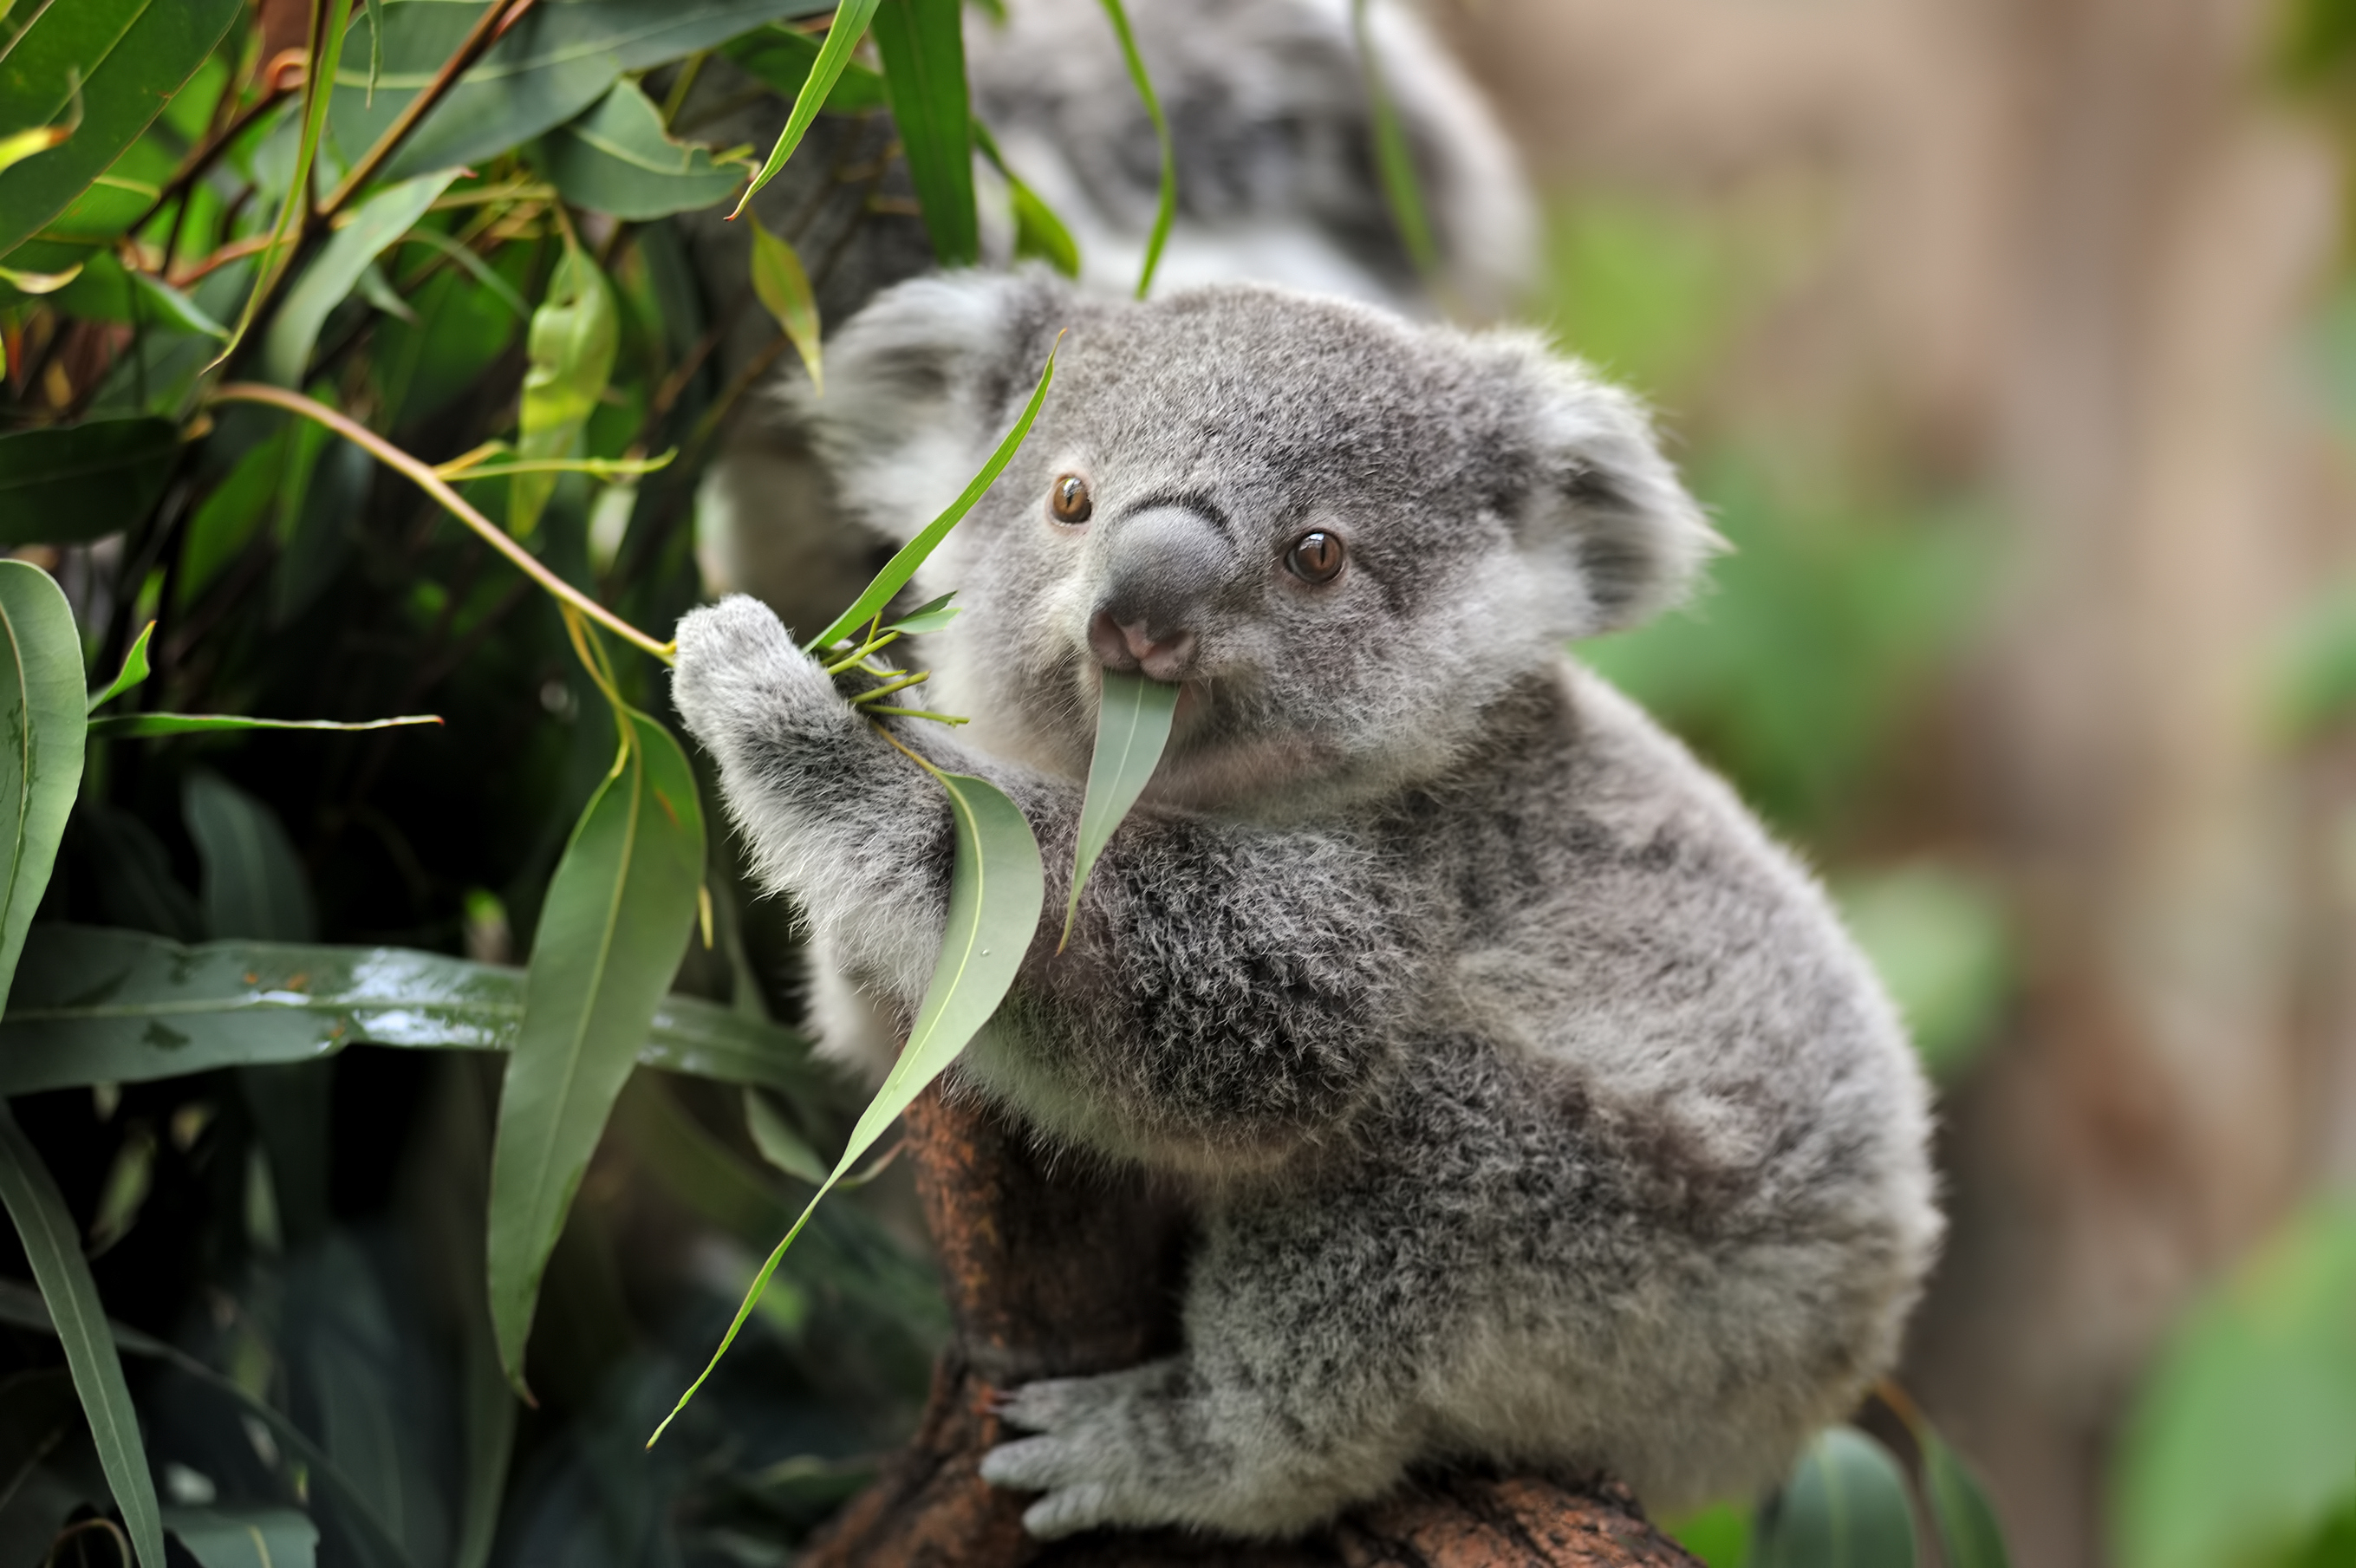 Close-up of a young koala bear on a tree eating eucalypt leaves